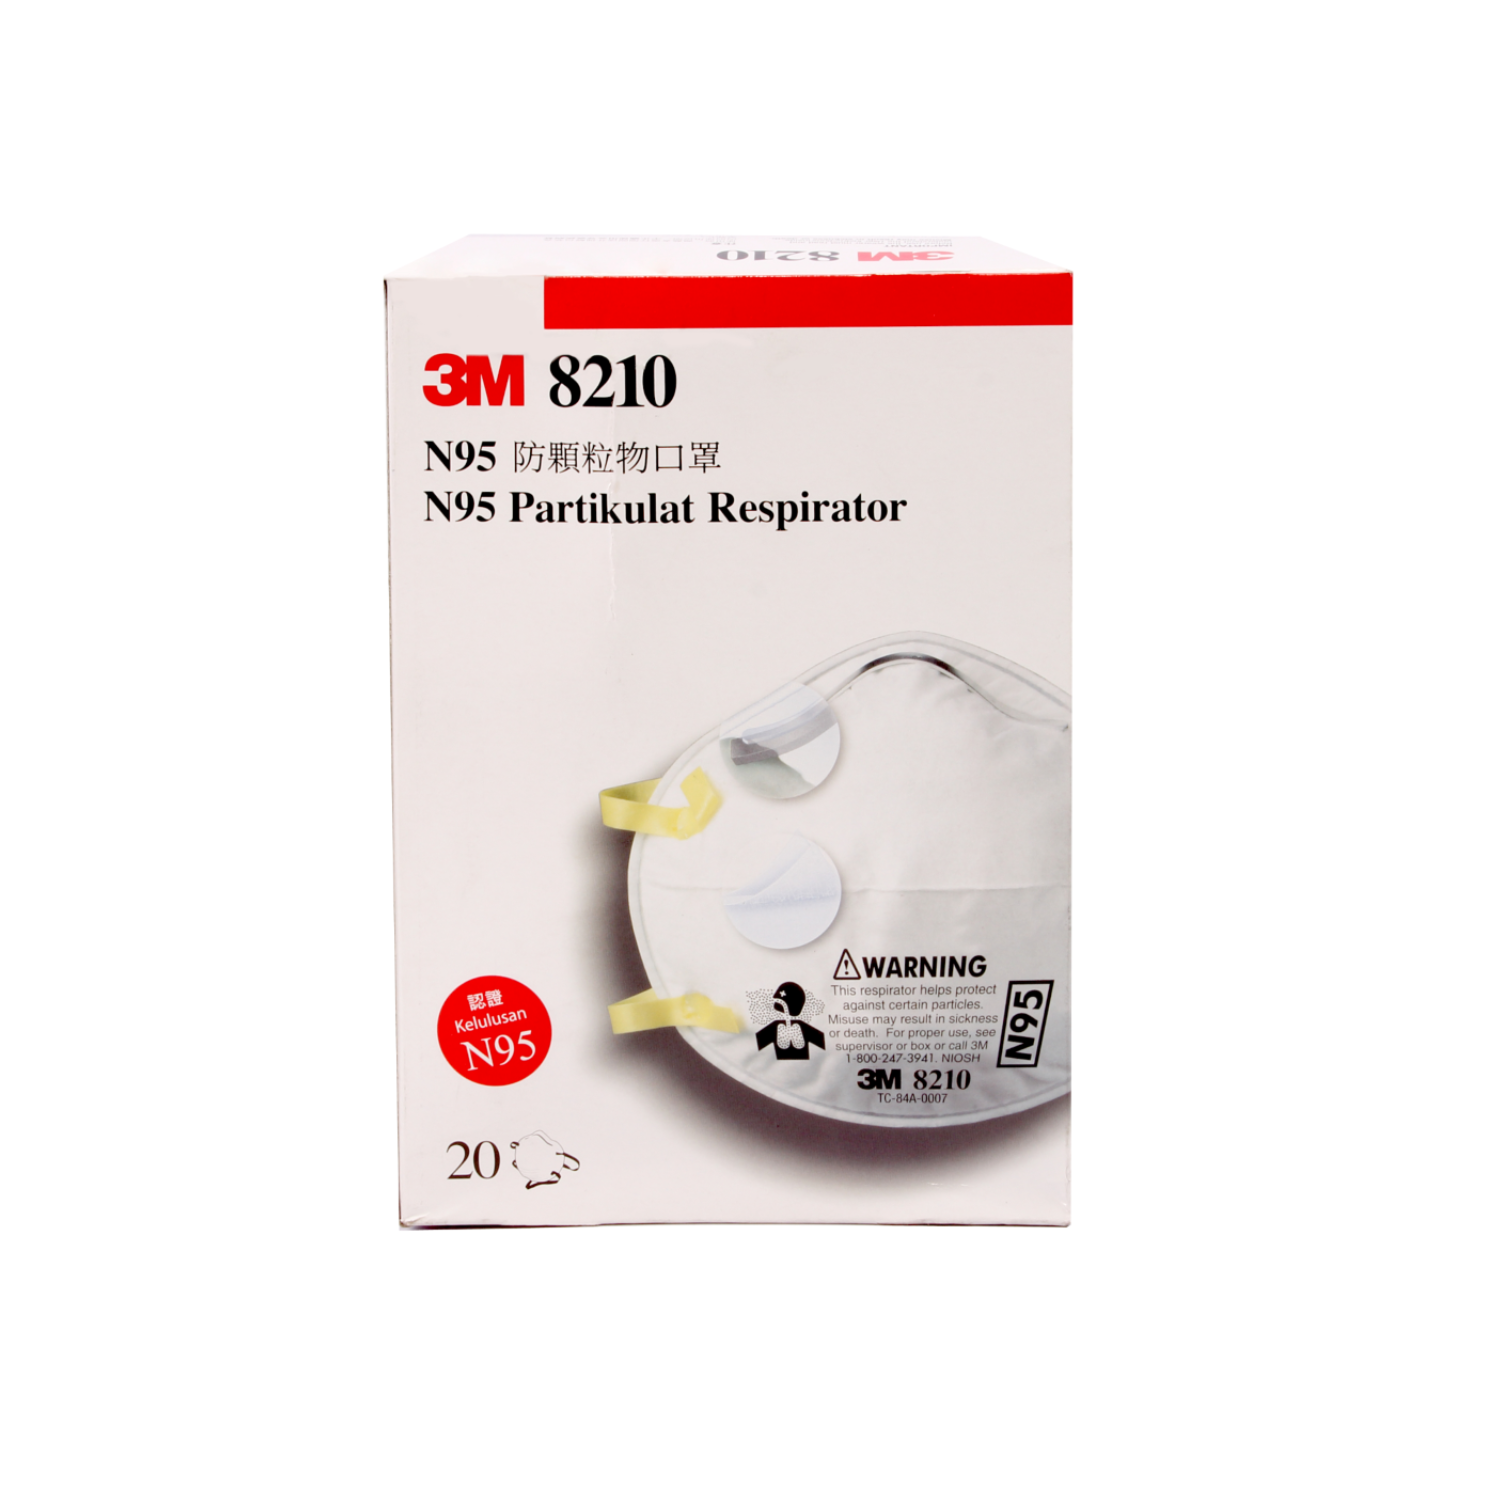 3M N95 Mask #8210 - N95 respiratory mask for protection.